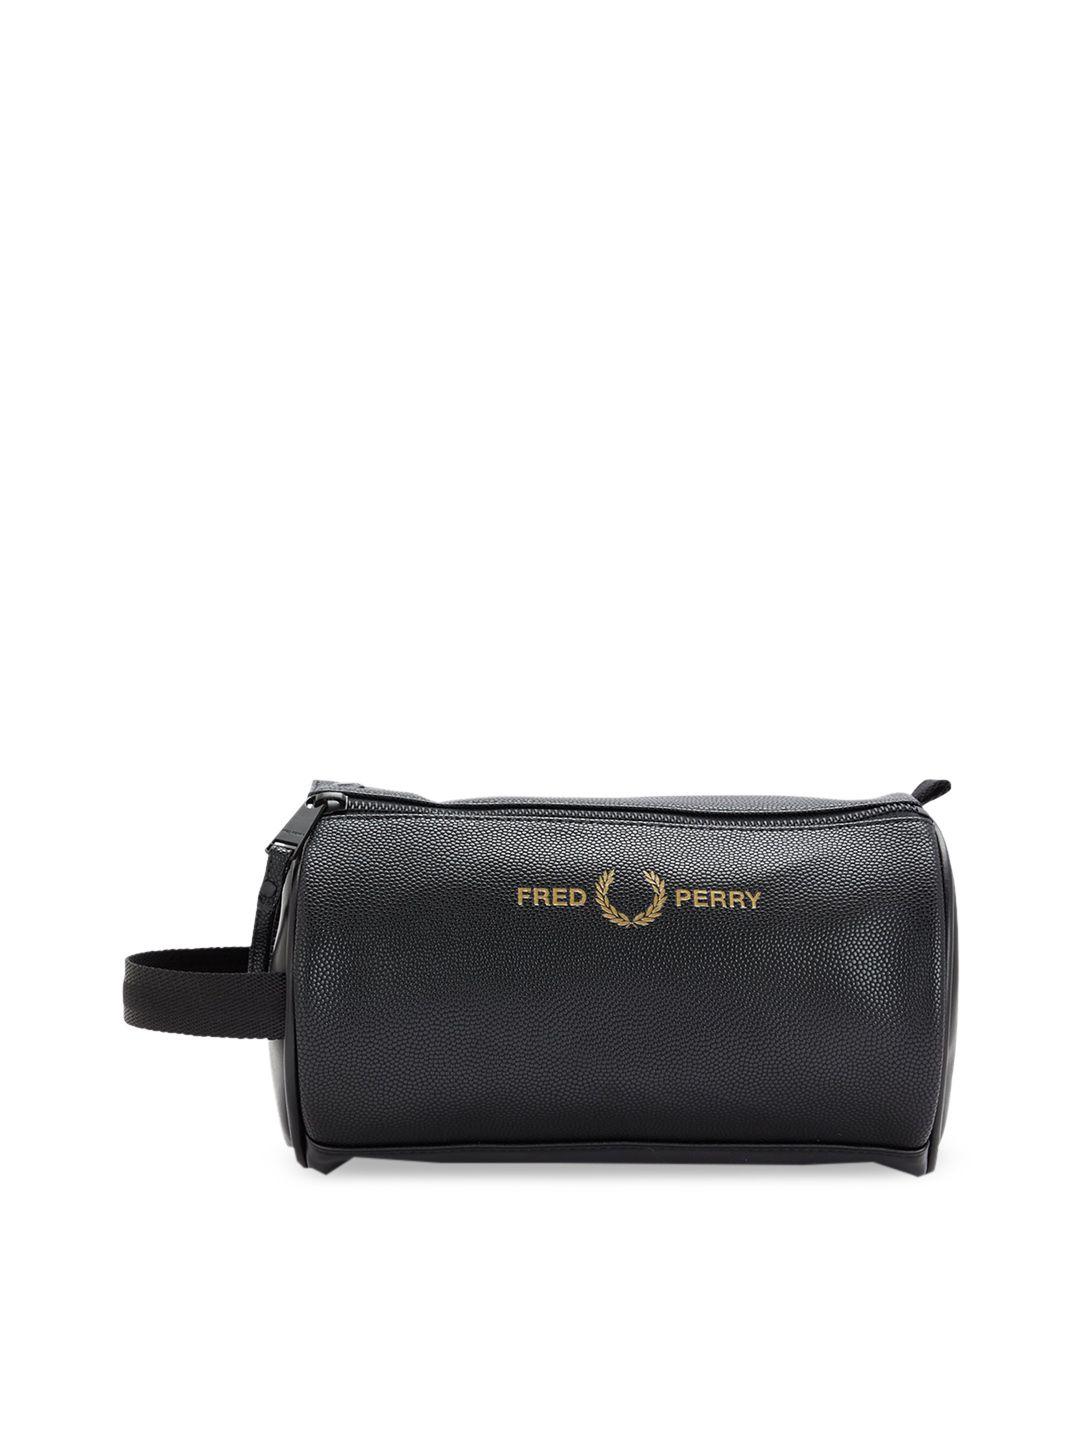 fred perry men black textured travel pouch